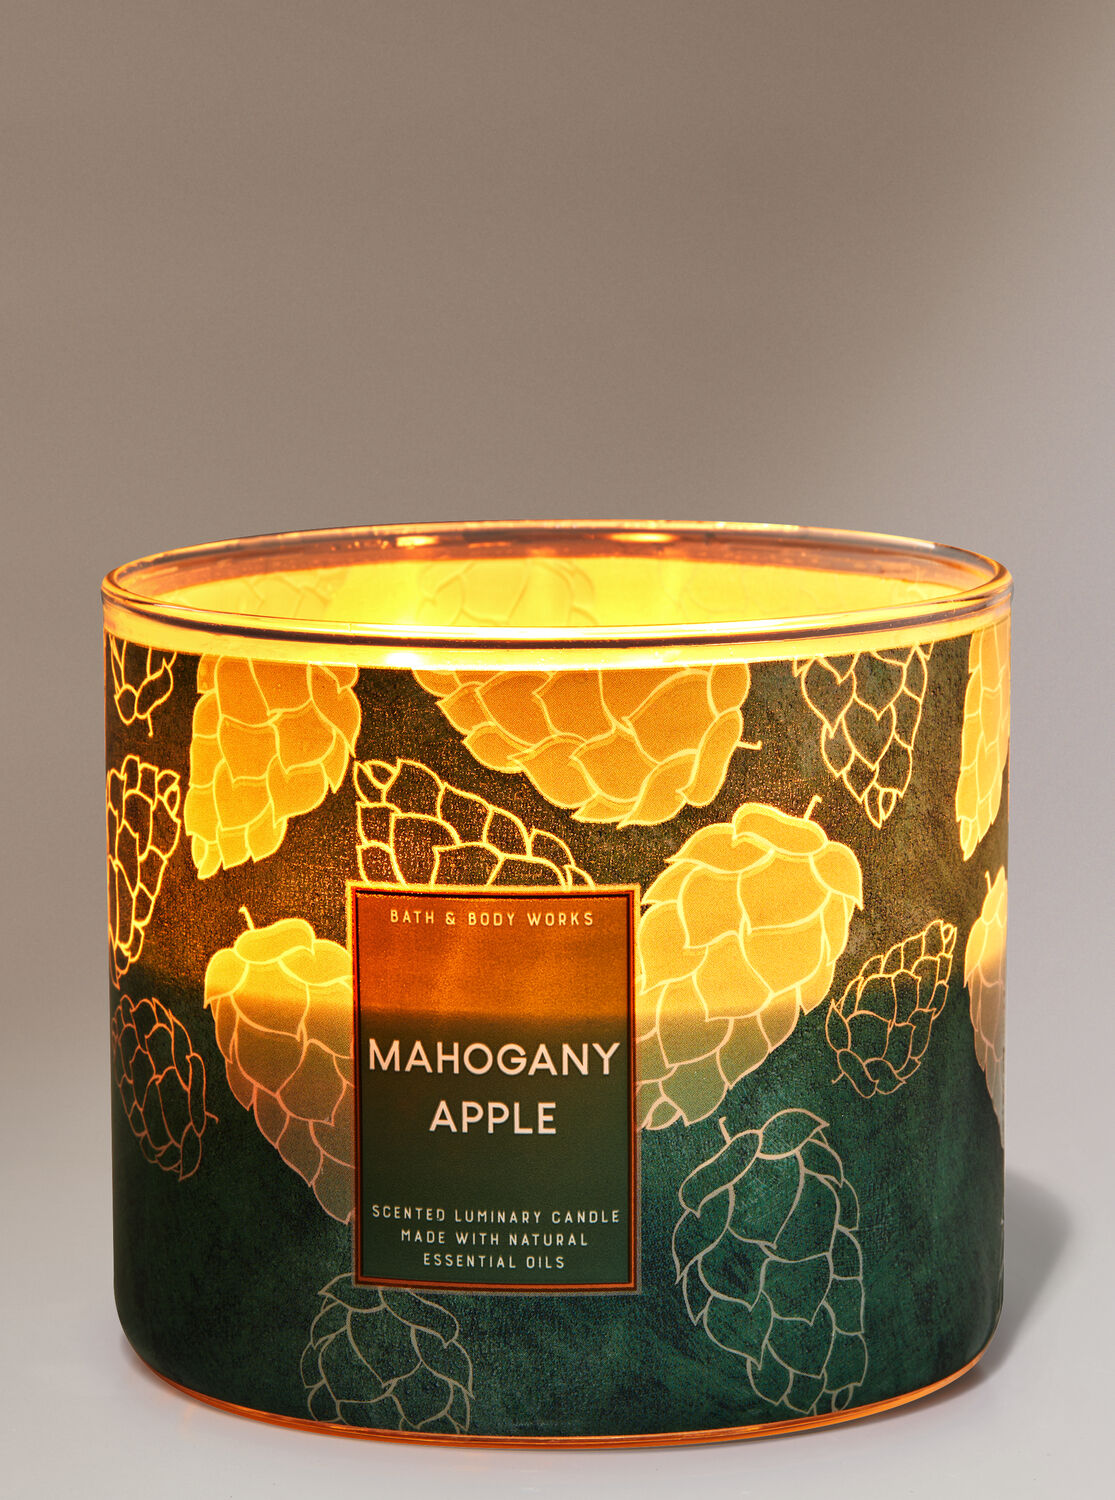 1 Bath & Body Works MAHOGANY APPLE Large 3-Wick Scented Candle 14.5 oz 